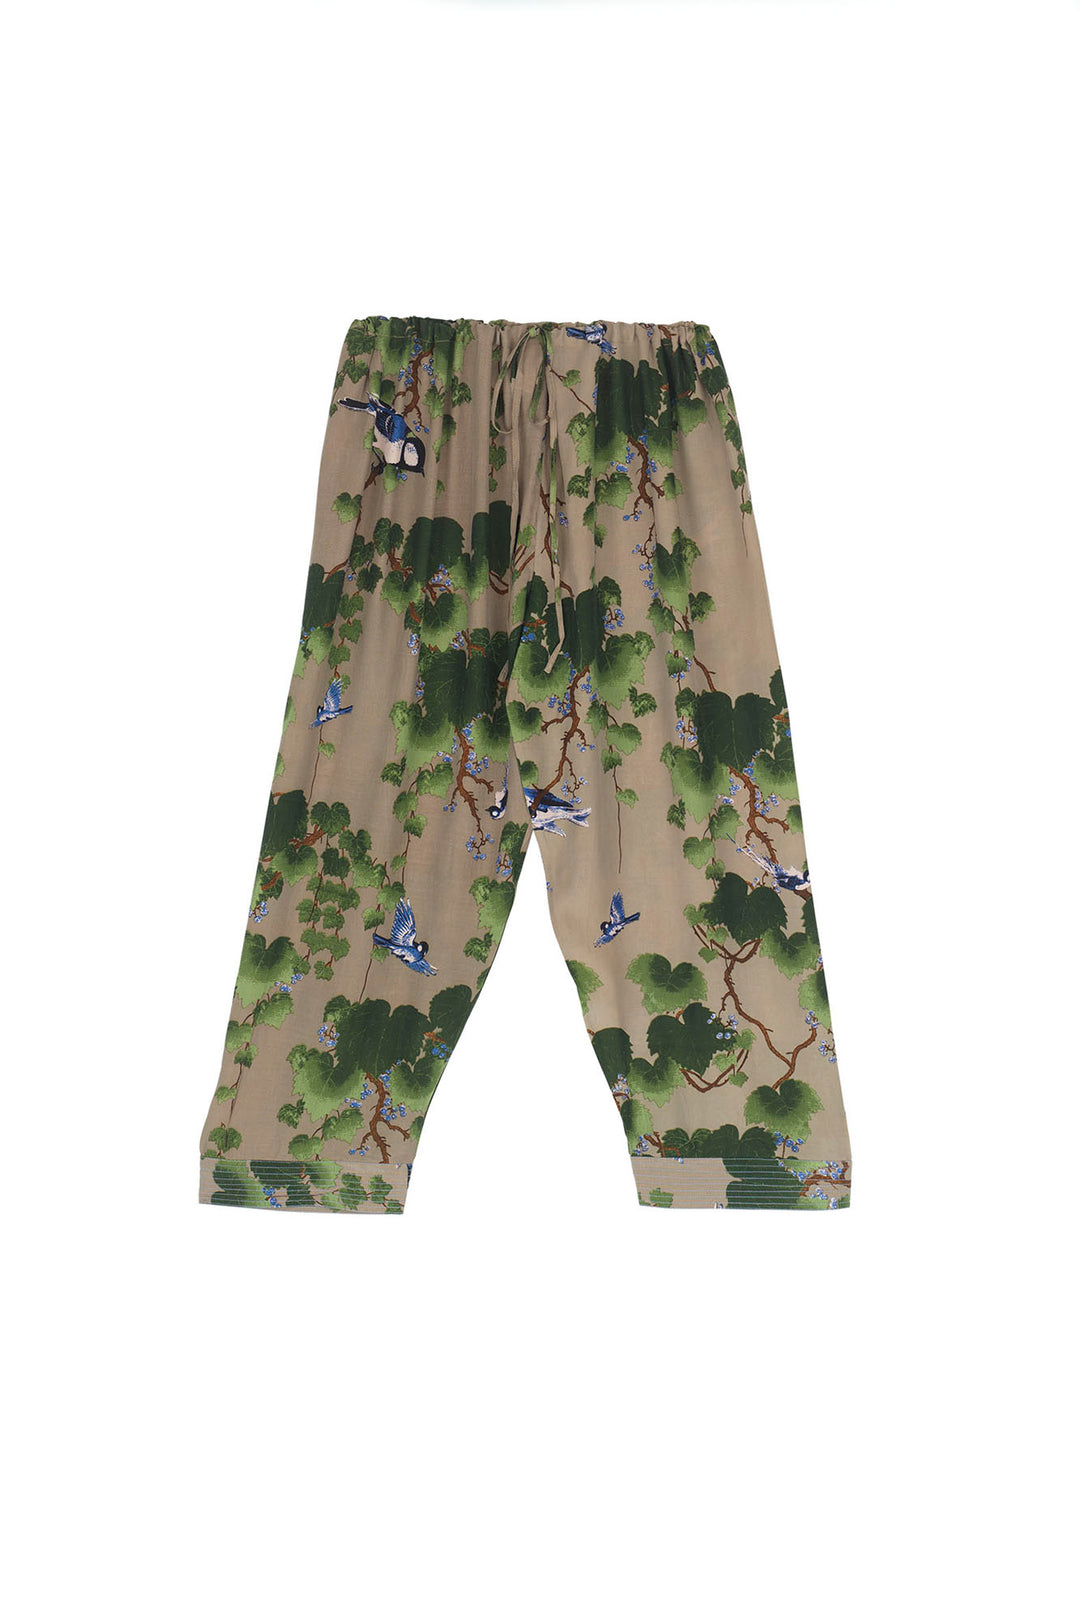 crepe cropped ladies trousers with green maple leaf pattern on a stone background by One Hundred Stars